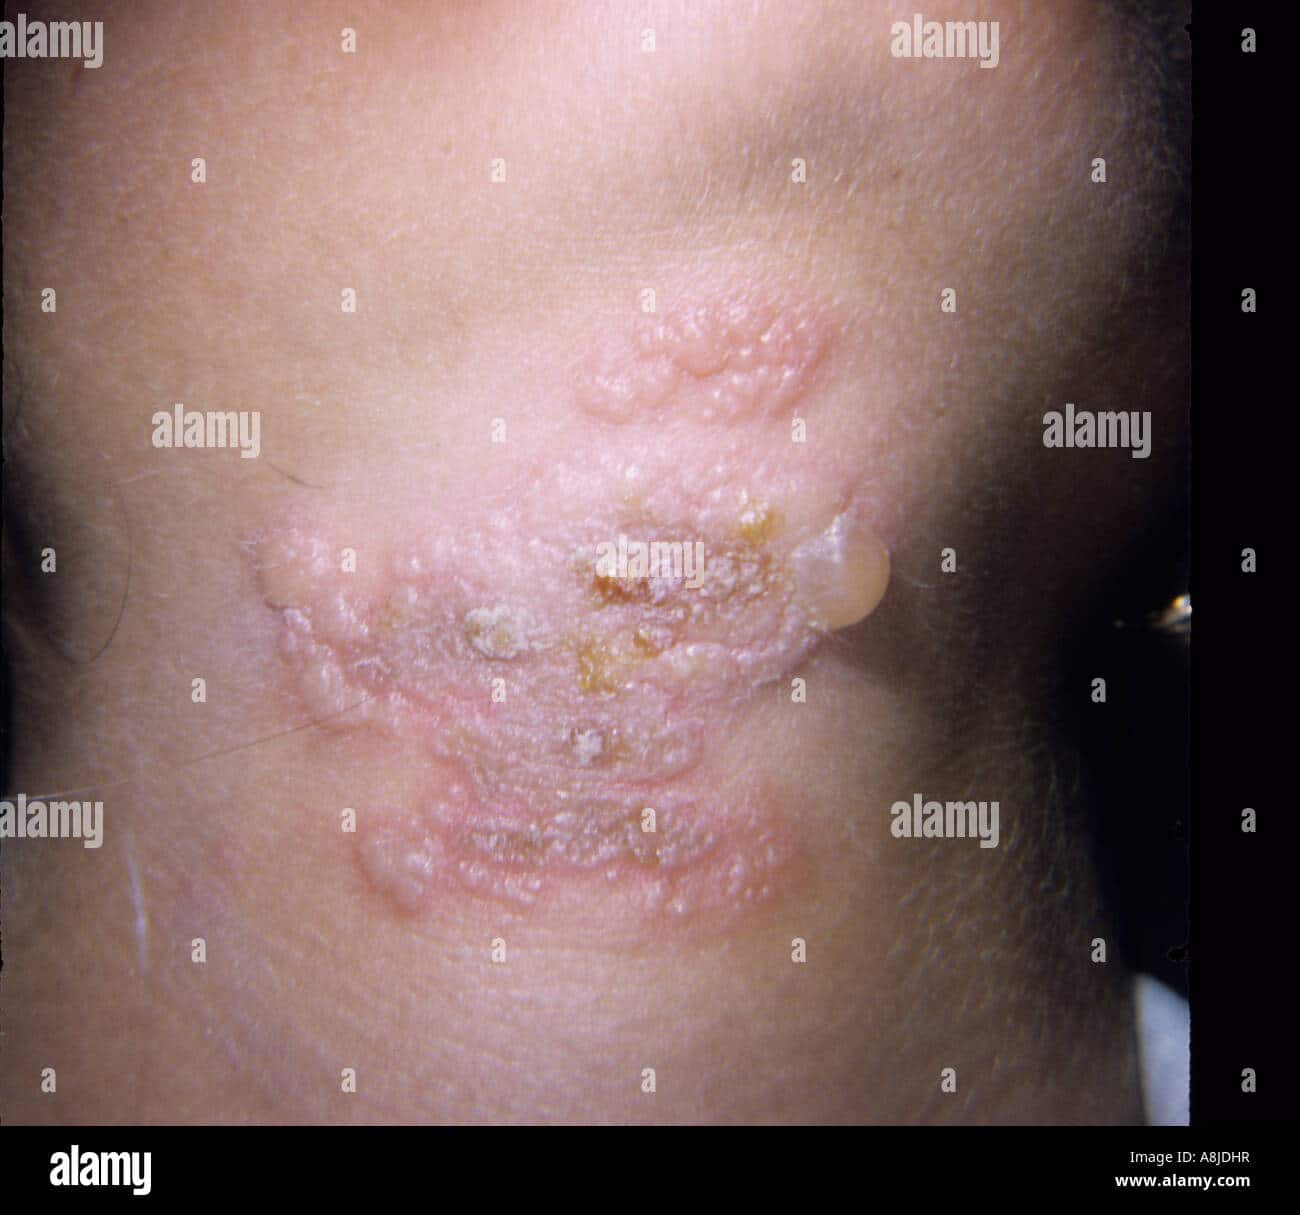 Herpes simplex rash on the patient